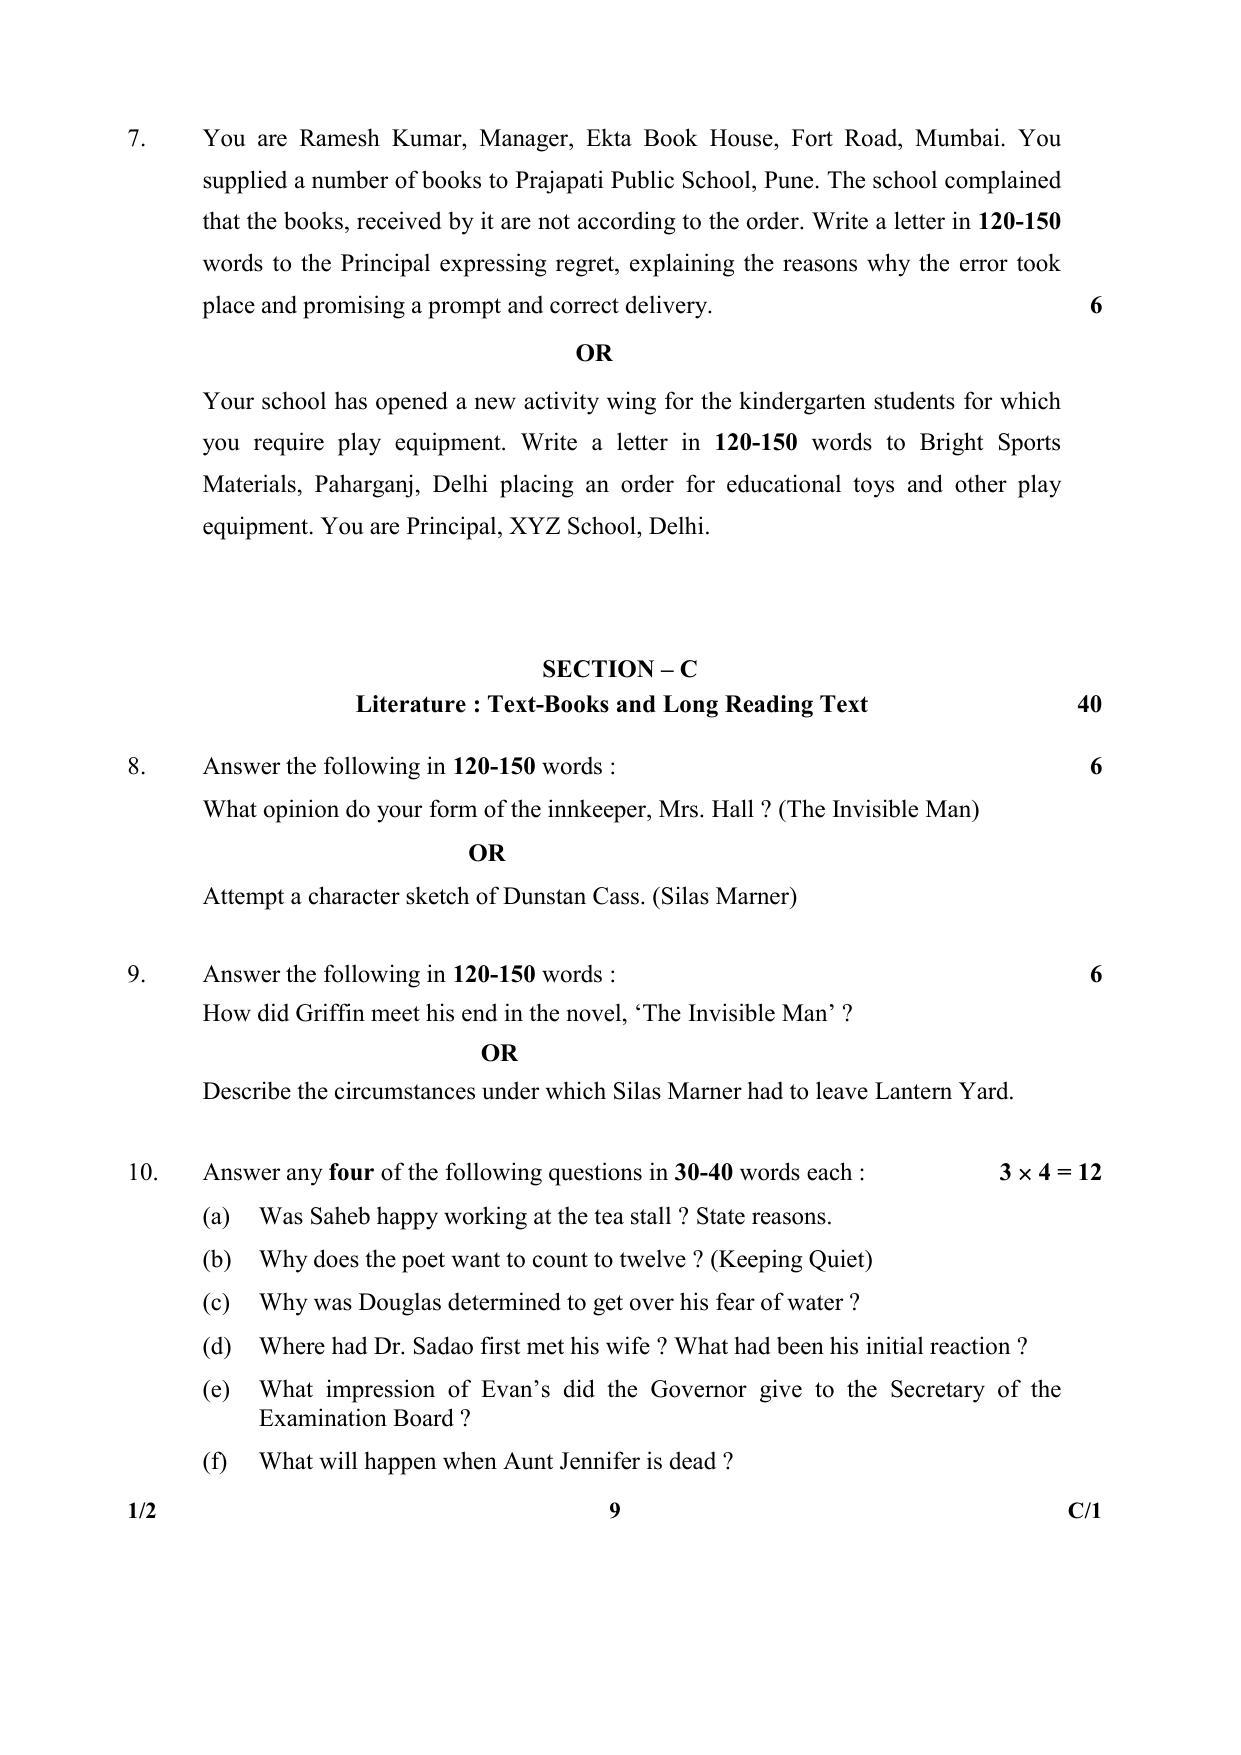 CBSE Class 12 1-2(English Core) 2018 Compartment Question Paper - Page 9